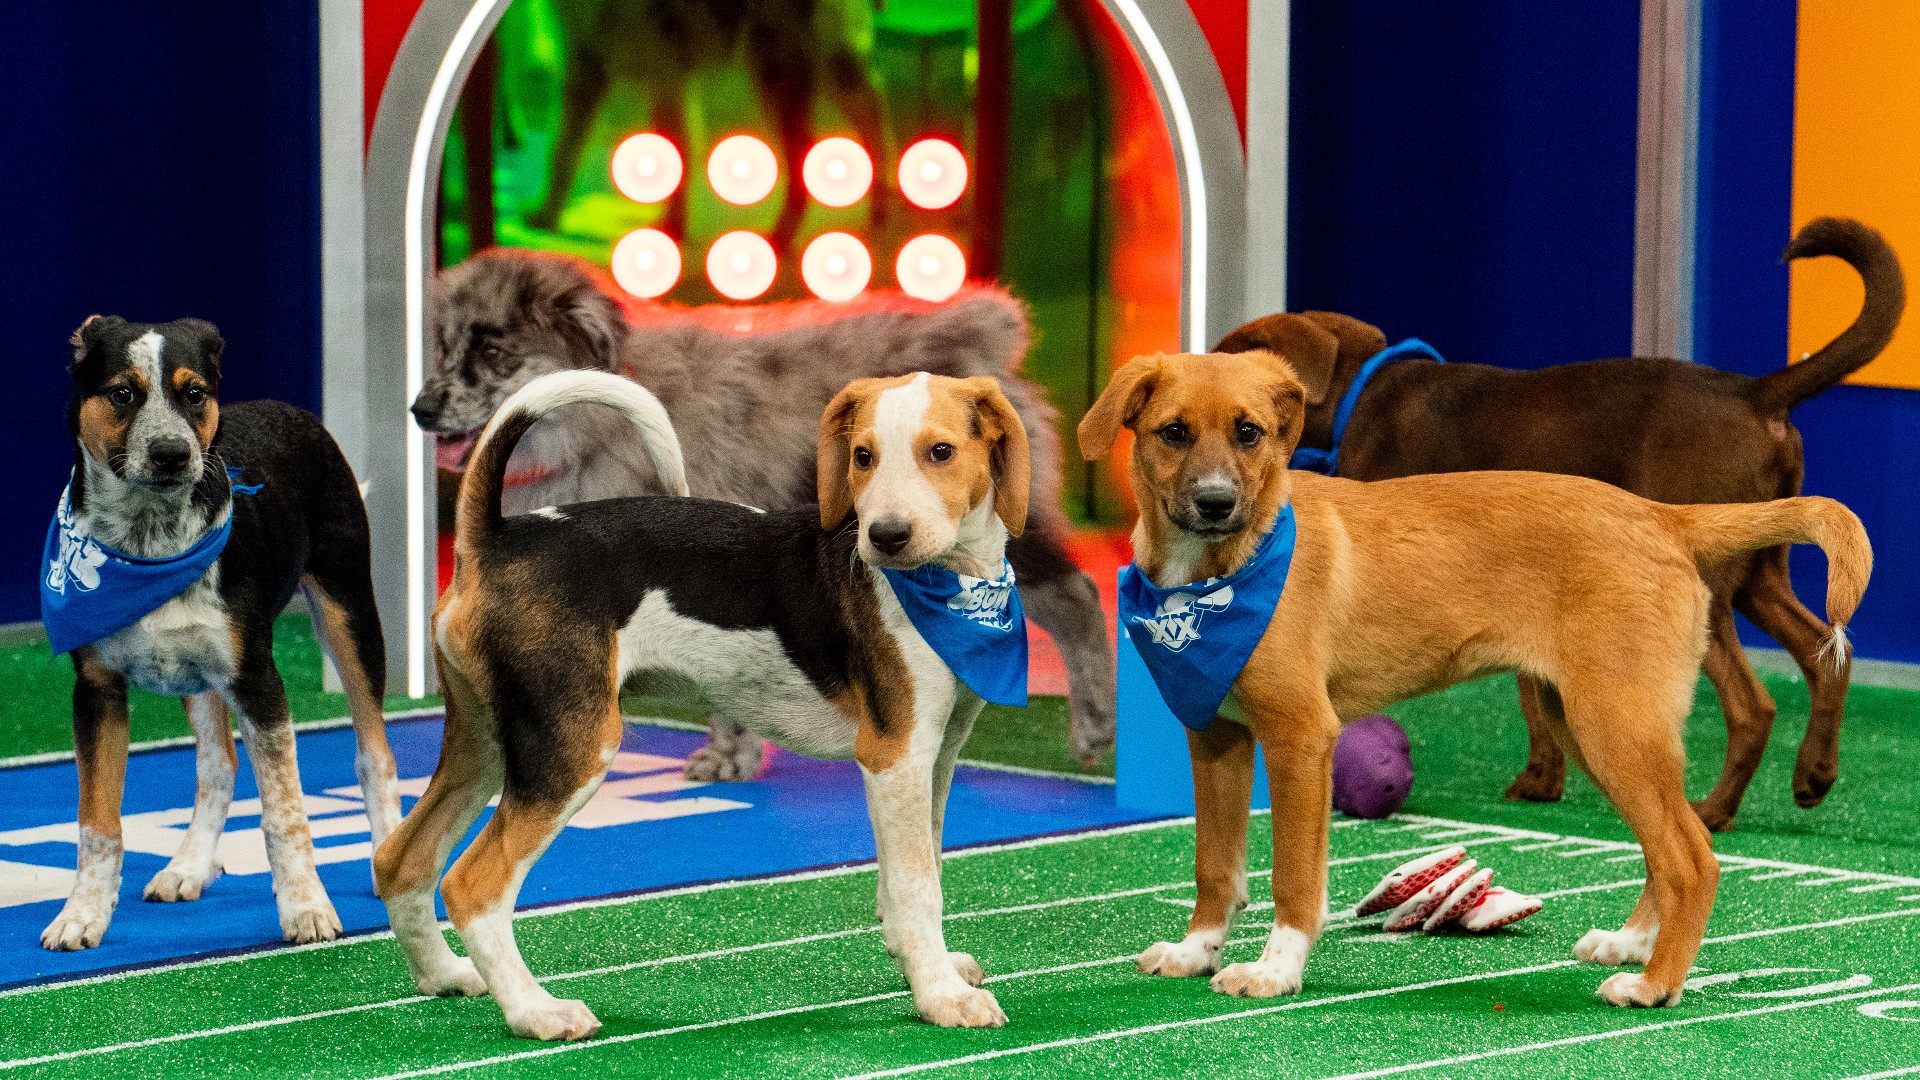 "Puppy Bowl XX" airs Sunday, Feb. 11 at 2 p.m. ET on Animal Planet, Discovery Channel, TBS and truTV and streams simultaneously on Discovery+ and Max.